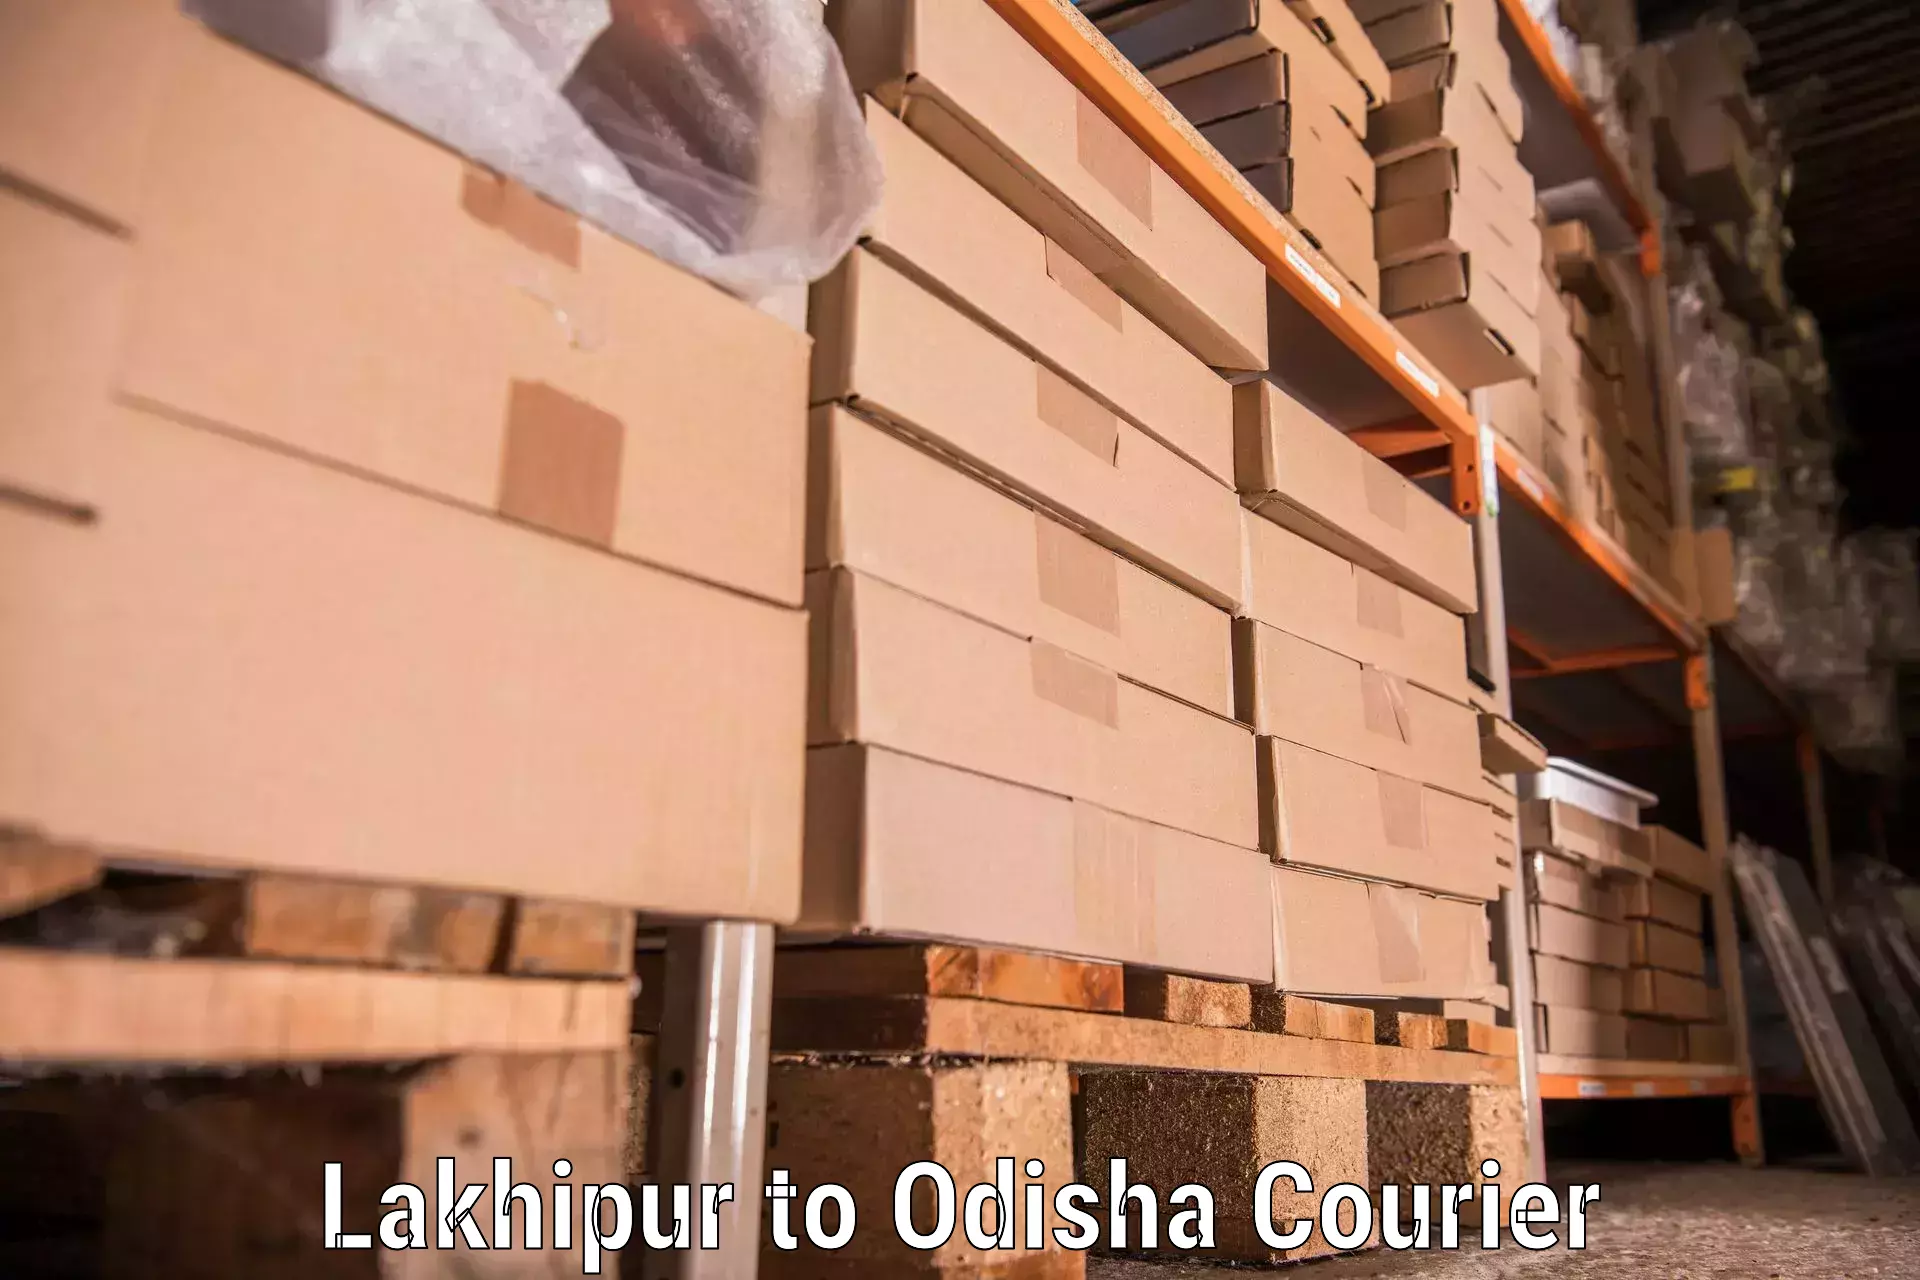 Efficient relocation services in Lakhipur to Kantabanji